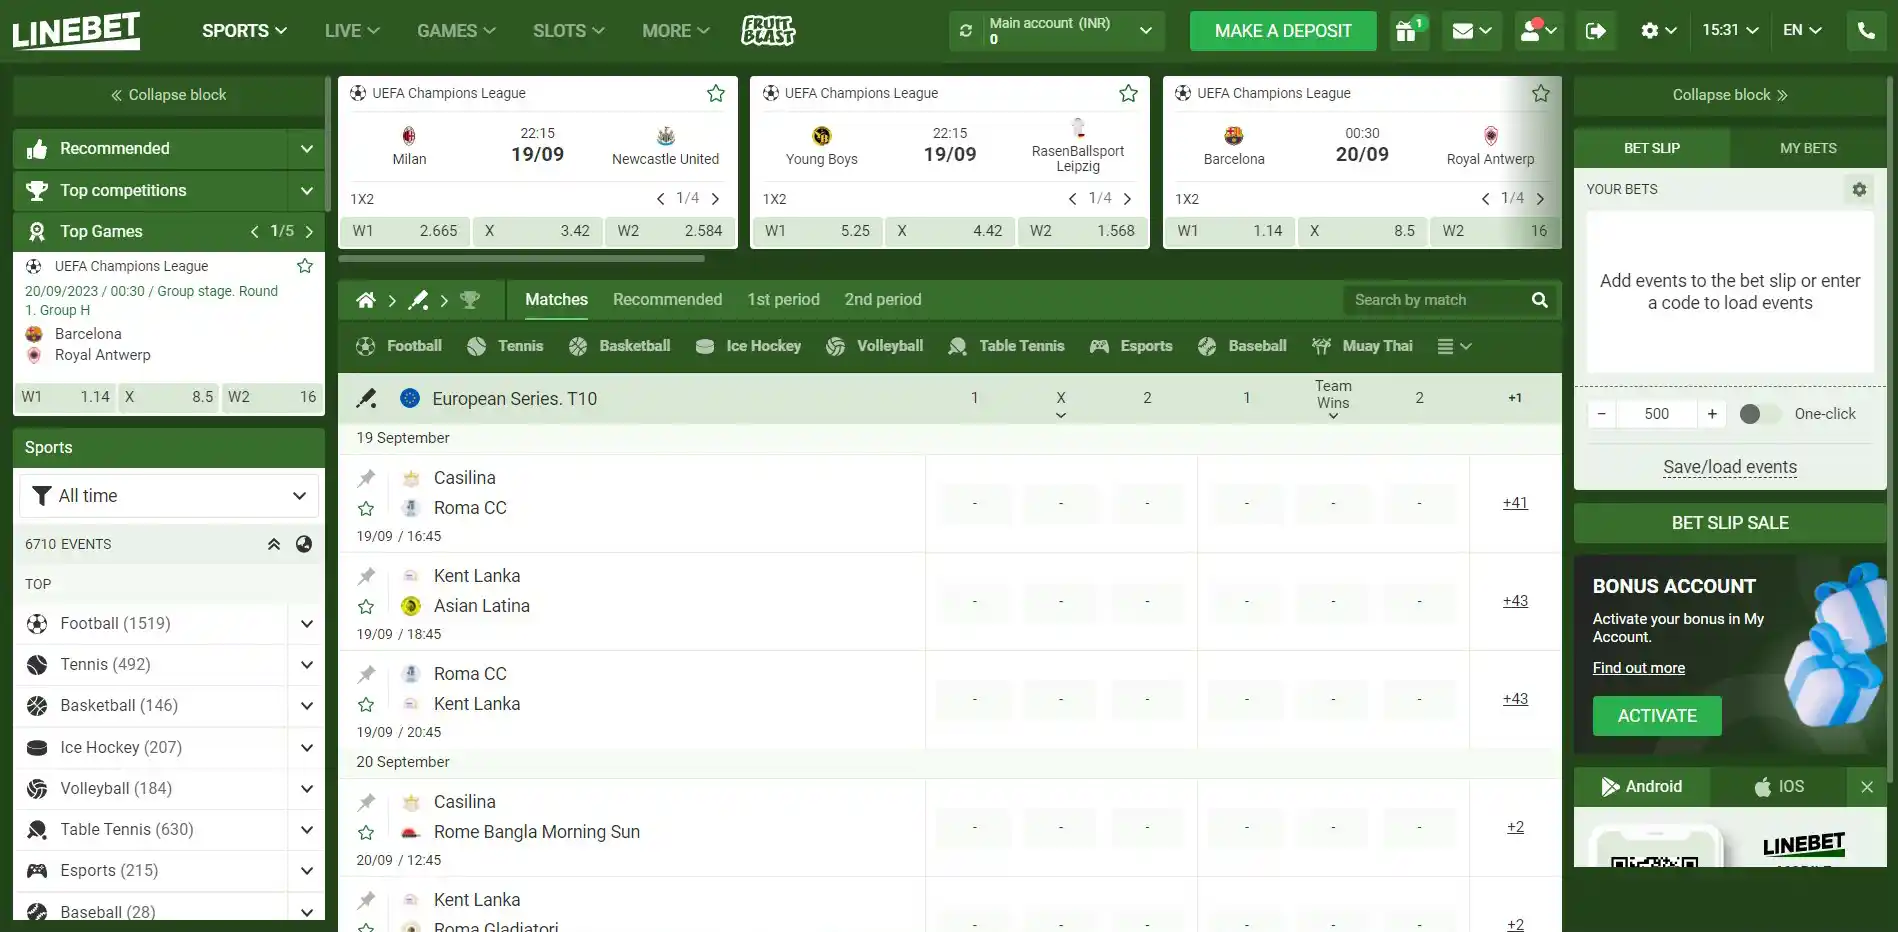 Open the cricket section and select a match to bet on.